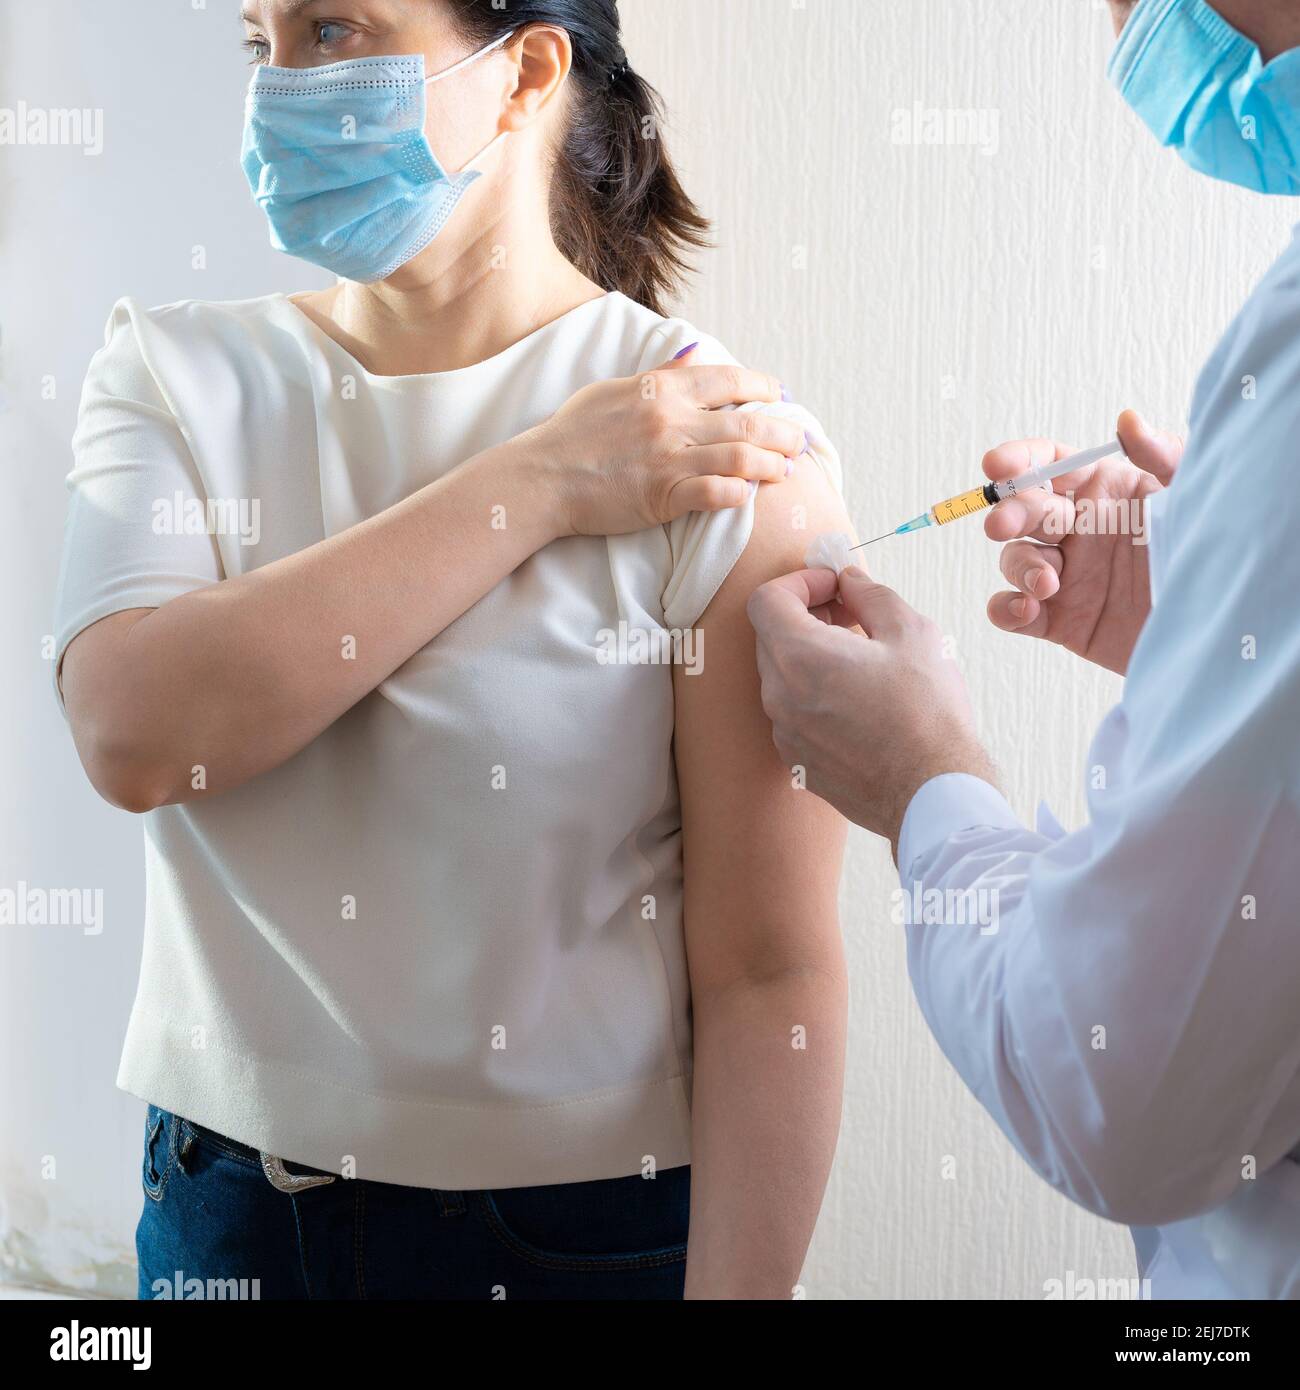 vaccination covid19. Doctor giving Covid vaccine to Mature woman. doctor is injecting female patients. Woman with face mask getting vaccinated, corona Stock Photo